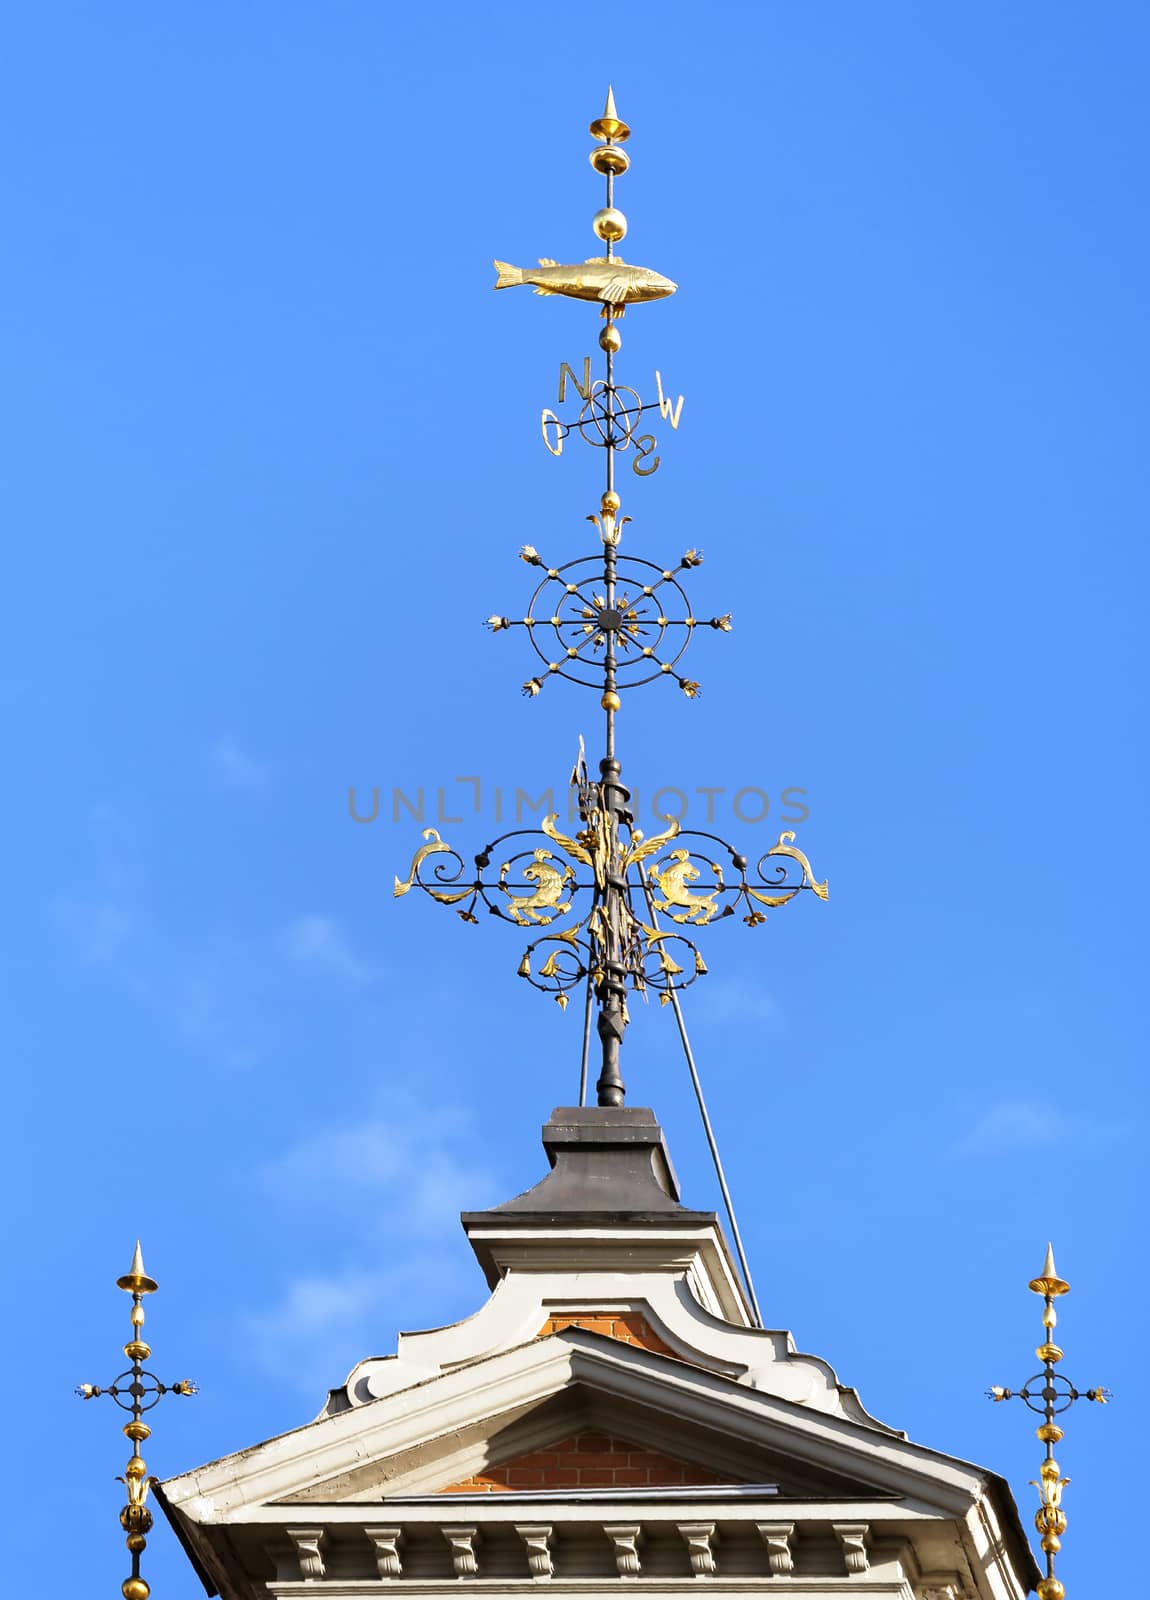 Top of the House of the Blackheads in Riga, Latvia